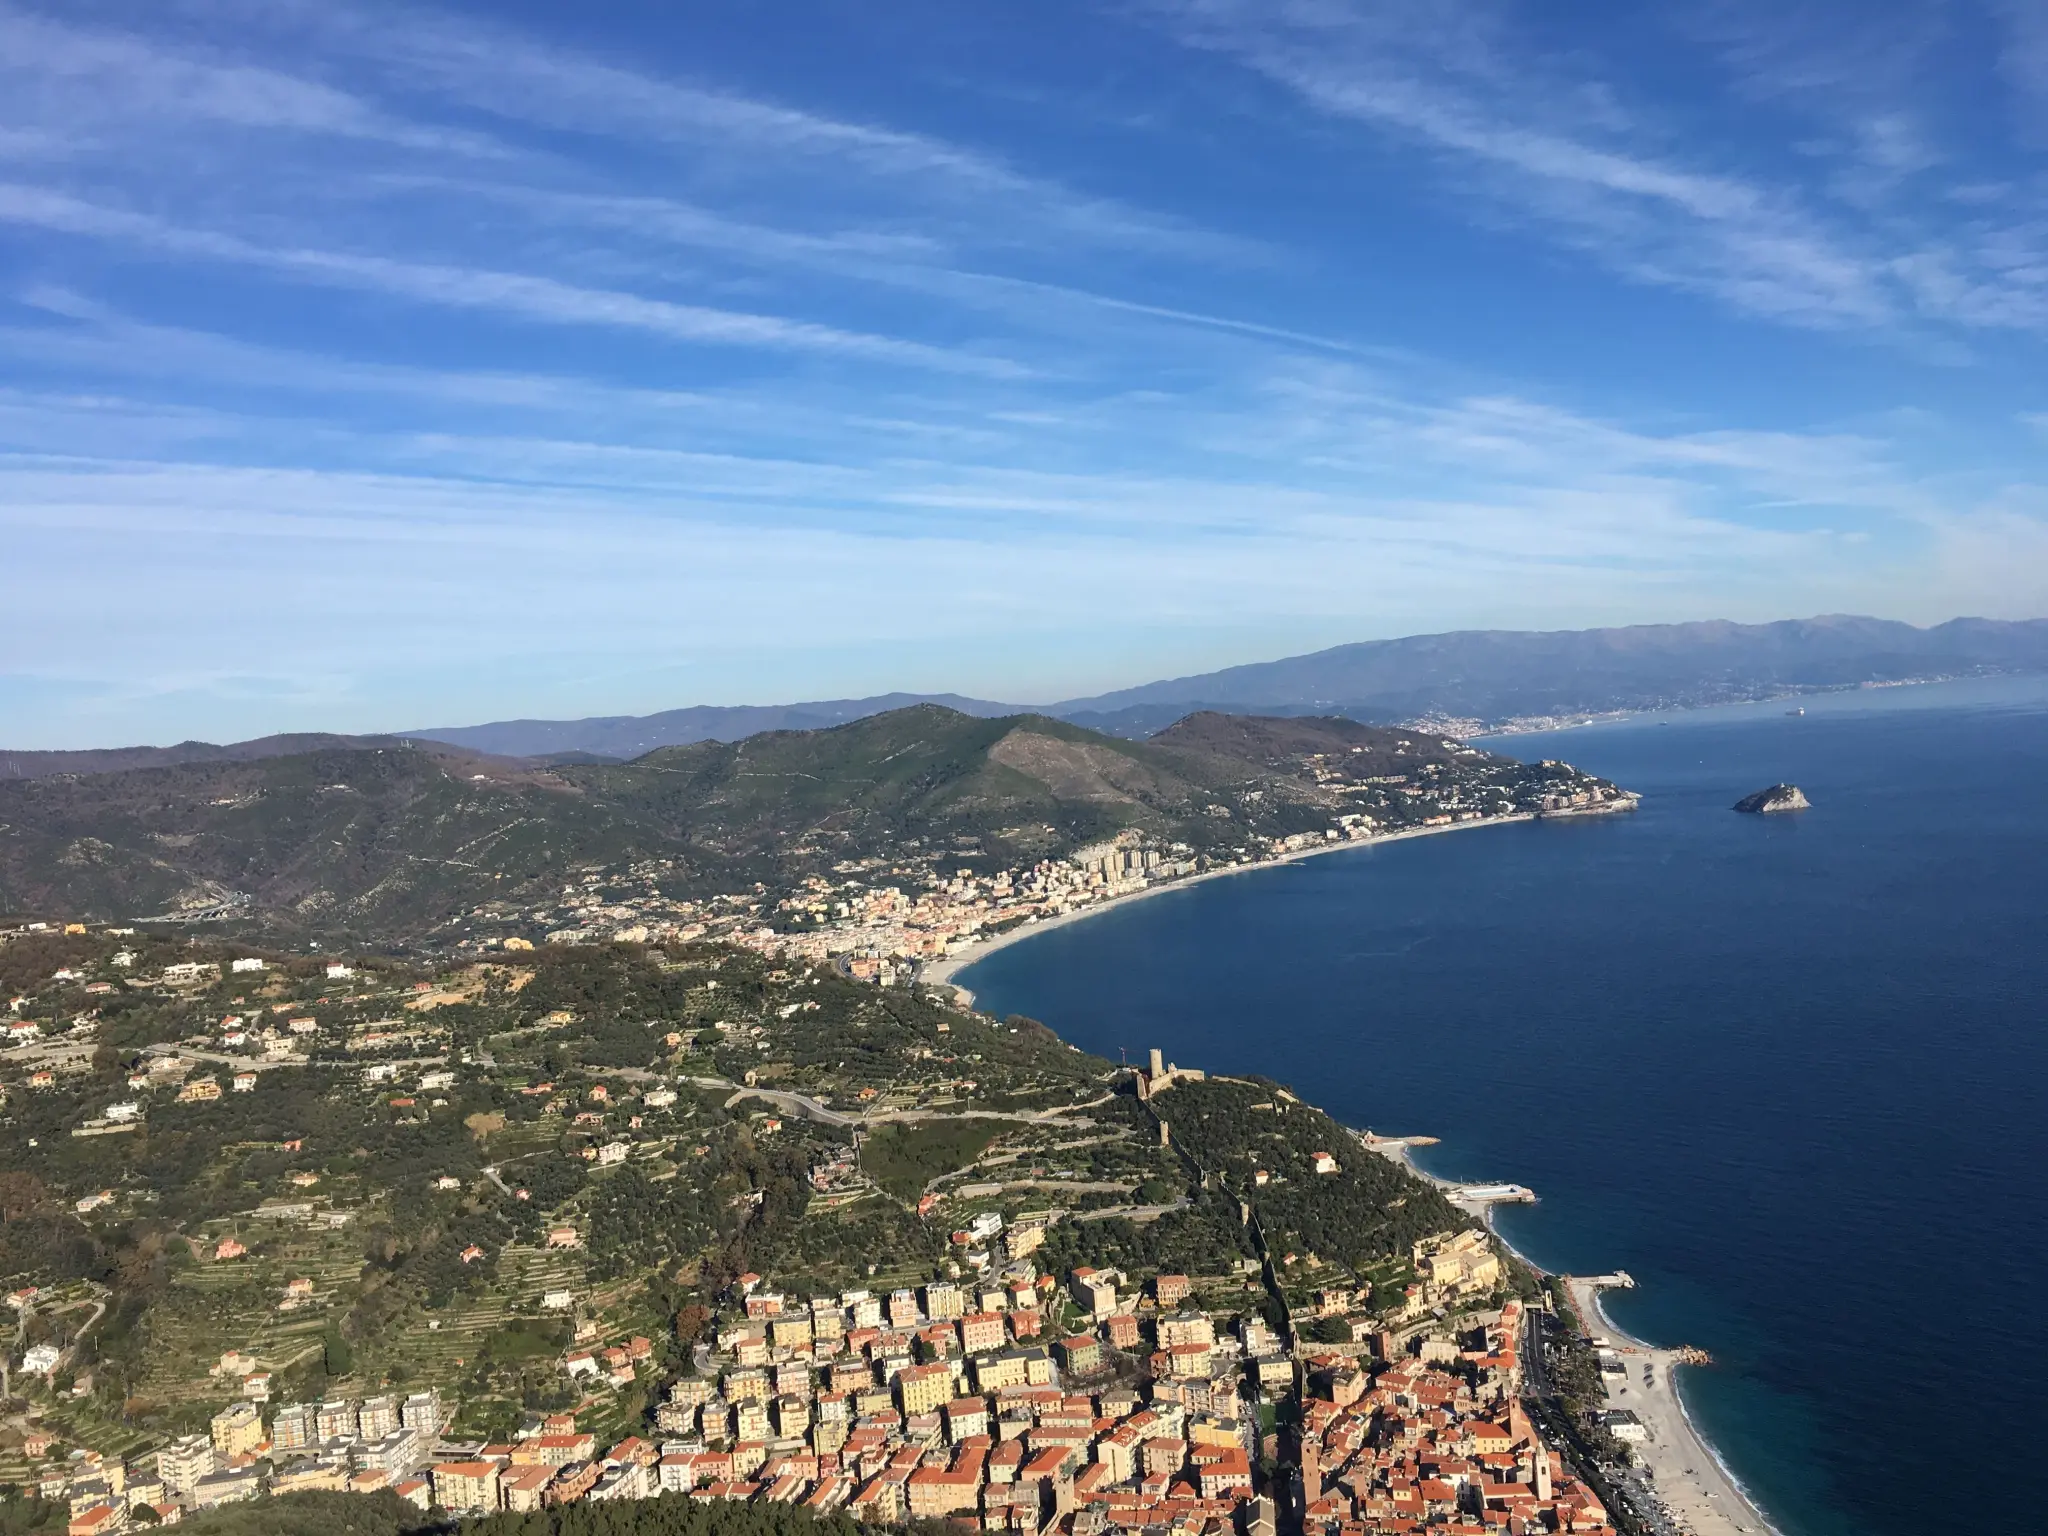 Italy paragliding trip. Flying where the best conditions are - on the coast of Finale Ligure, over the roofs of Pisa, in the hills of Tuscany